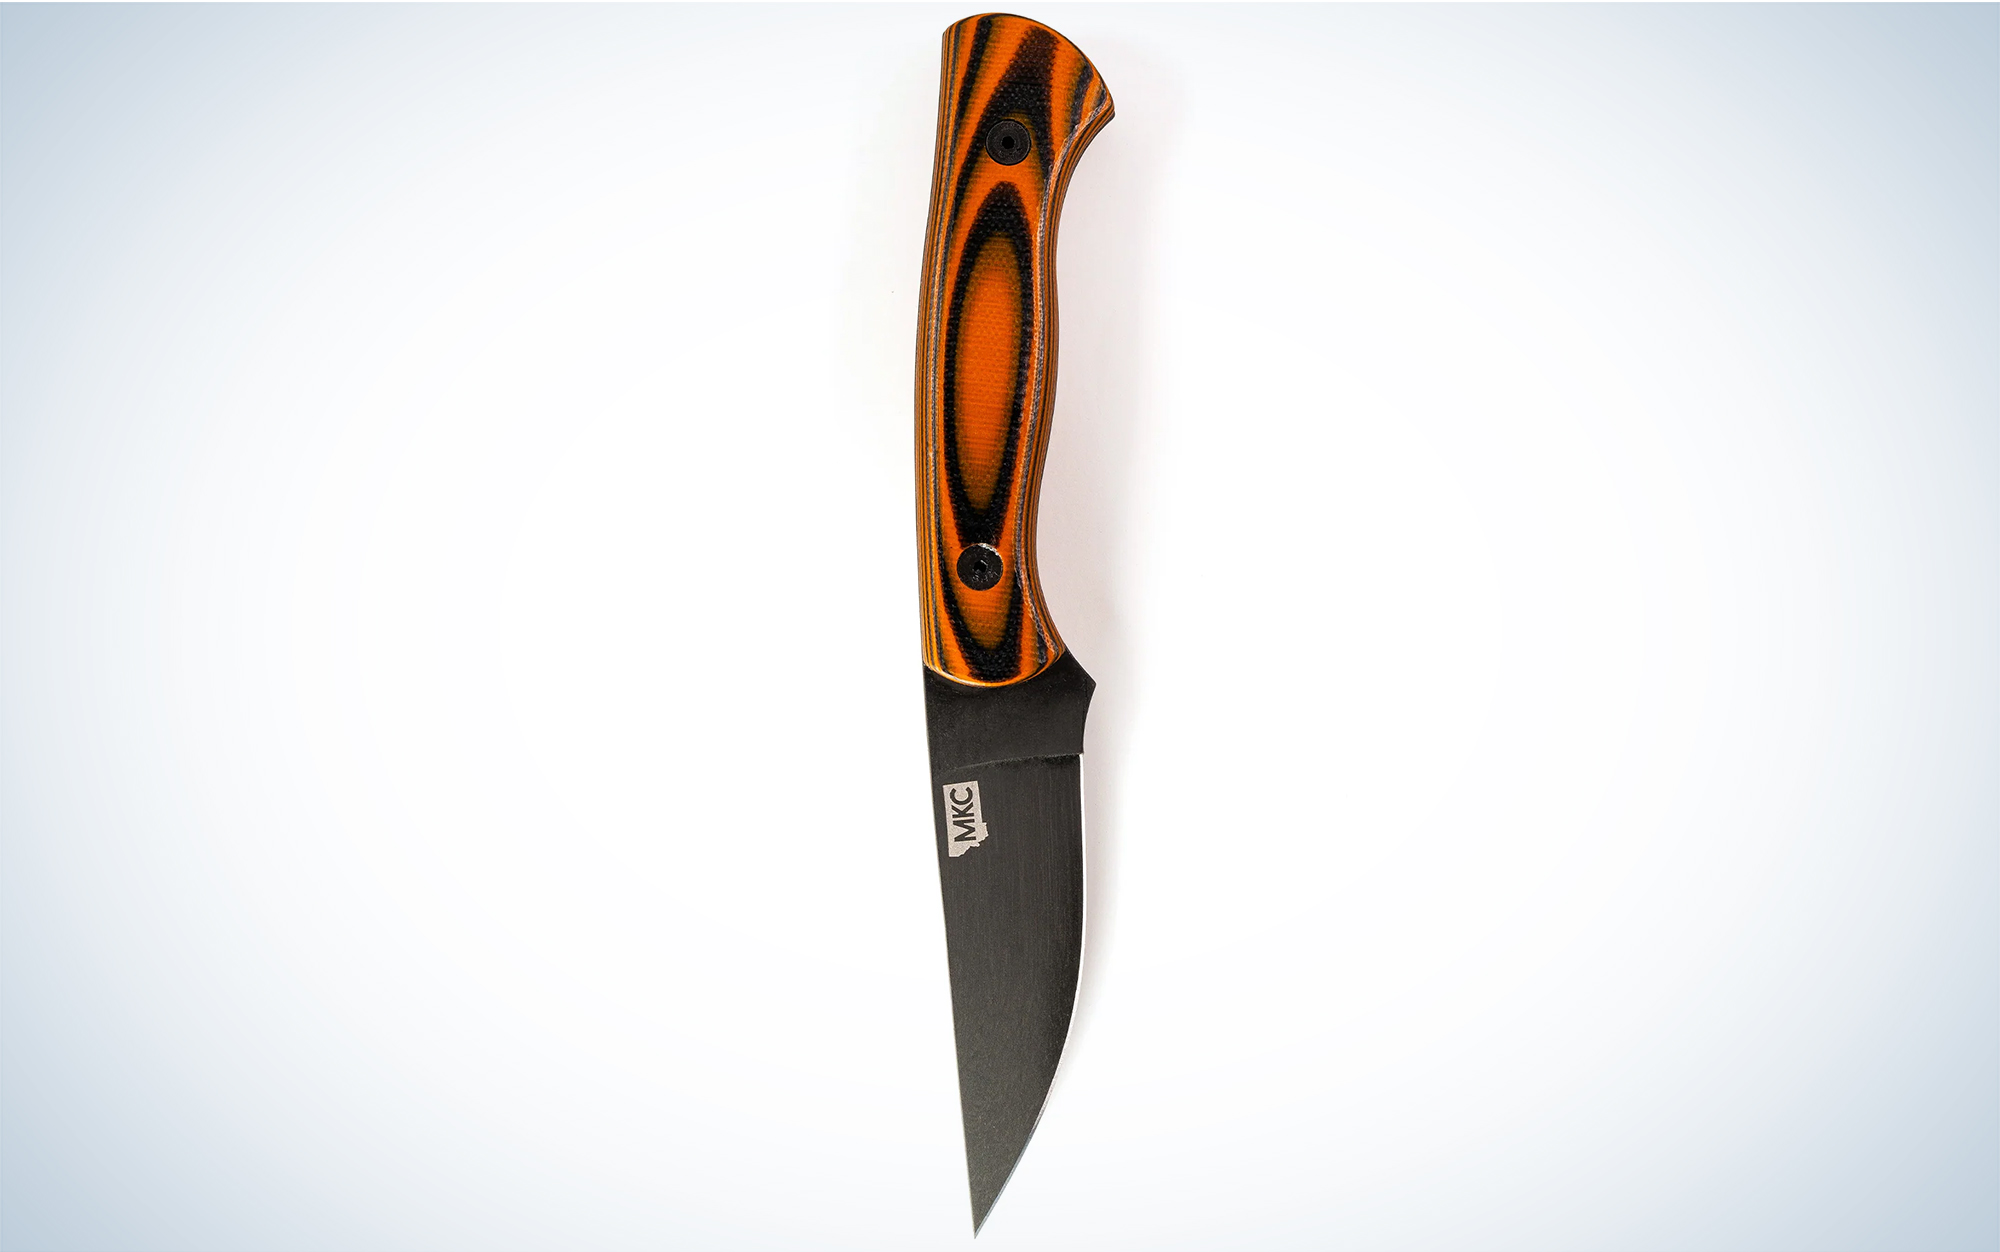 Pocket Knife with Replaceable Blades - North Ridge Fire Equipment